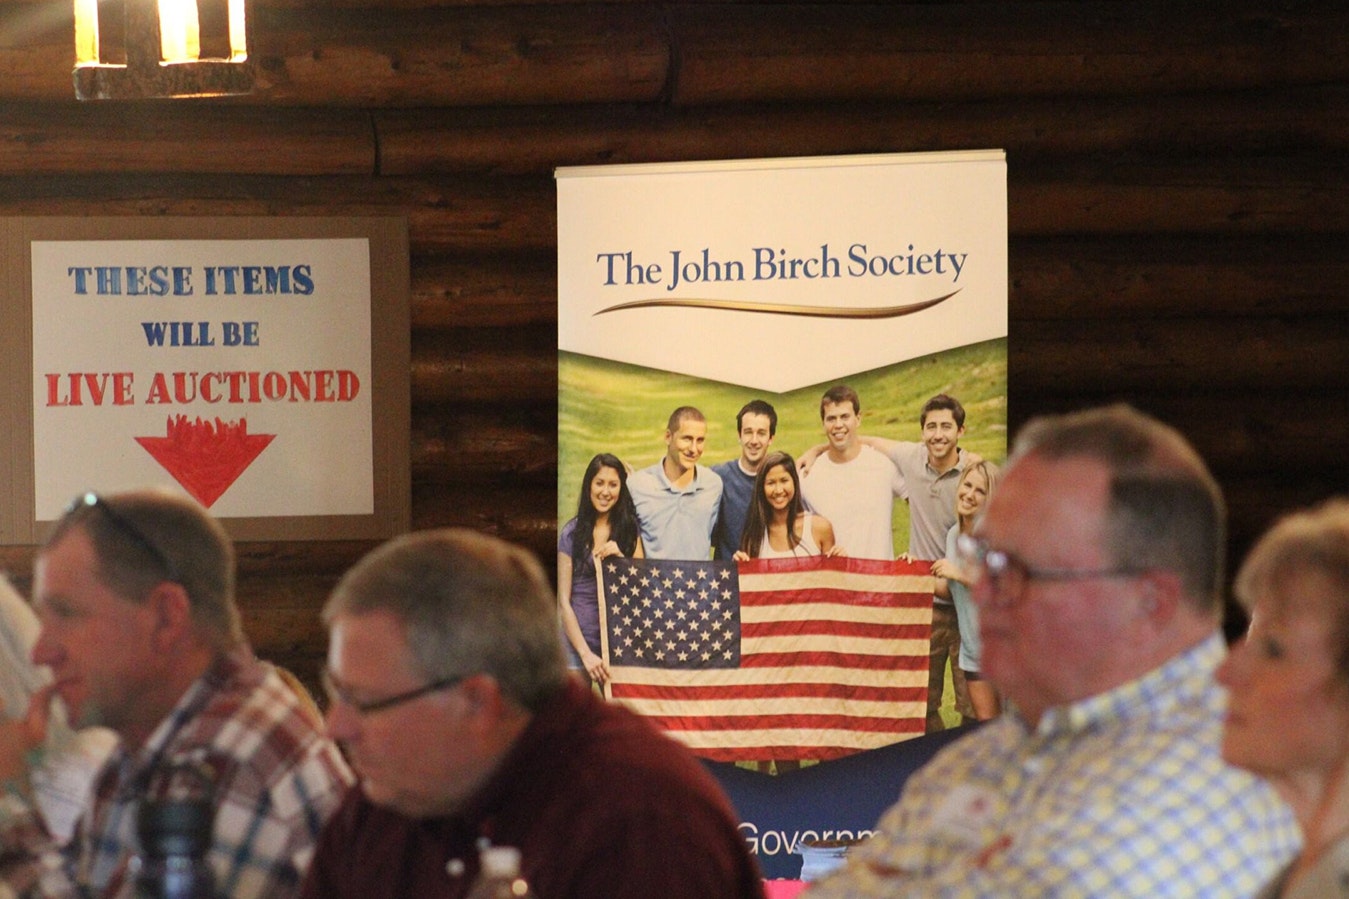 The John Birch Society was at Saturday's meeting of the Wyoming Republican Party Central Committee in Laramie.